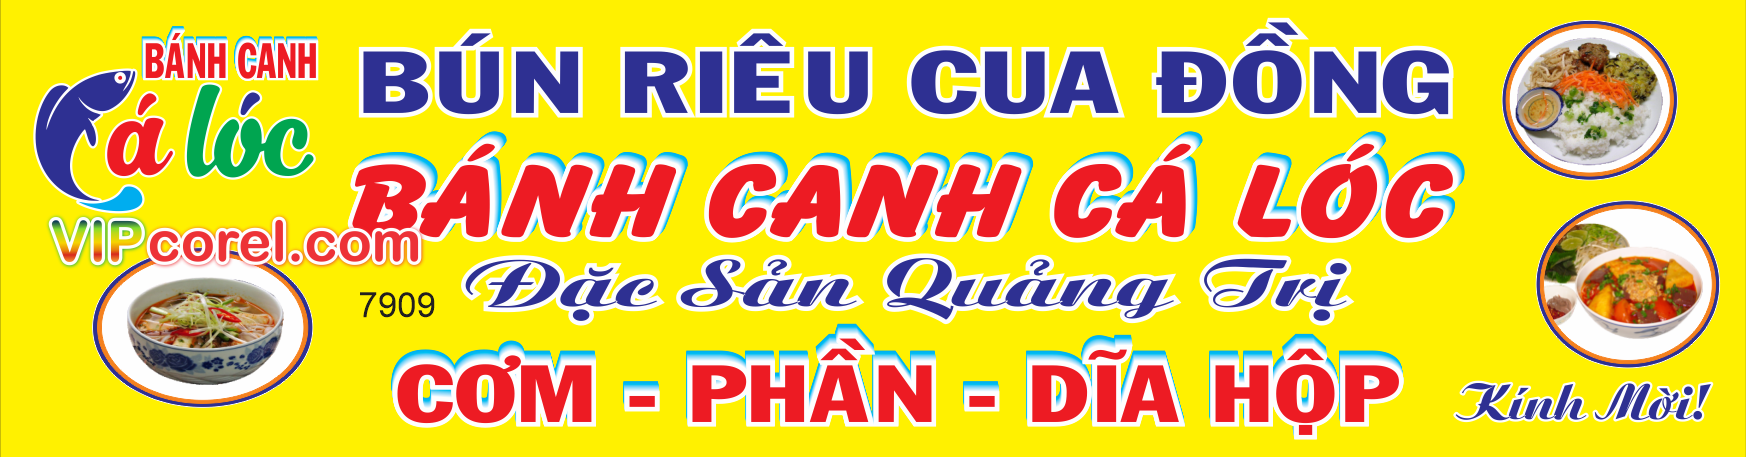 banh canh ca loc.png